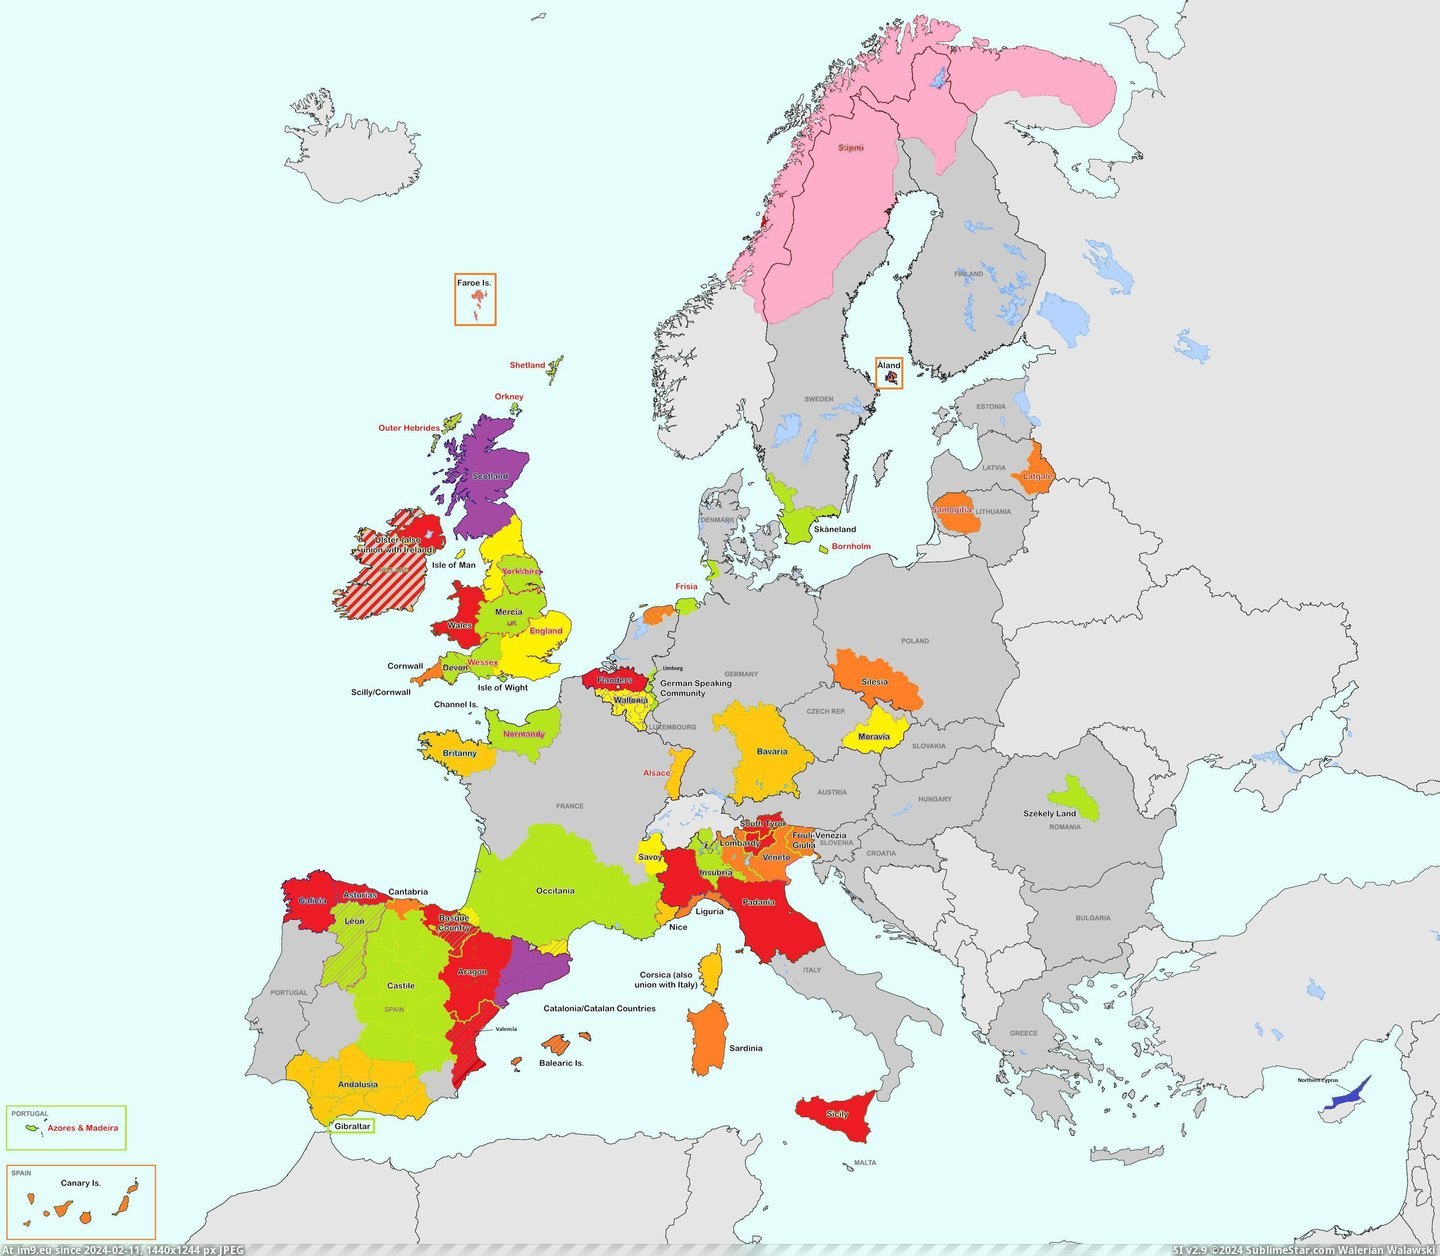 #Wanted #Activity #Movements #Separatist #Details #Feedback [Mapporn] Activity of separatist movements in the EU [3636x3152] (details in the comments - feedback wanted) Pic. (Image of album My r/MAPS favs))